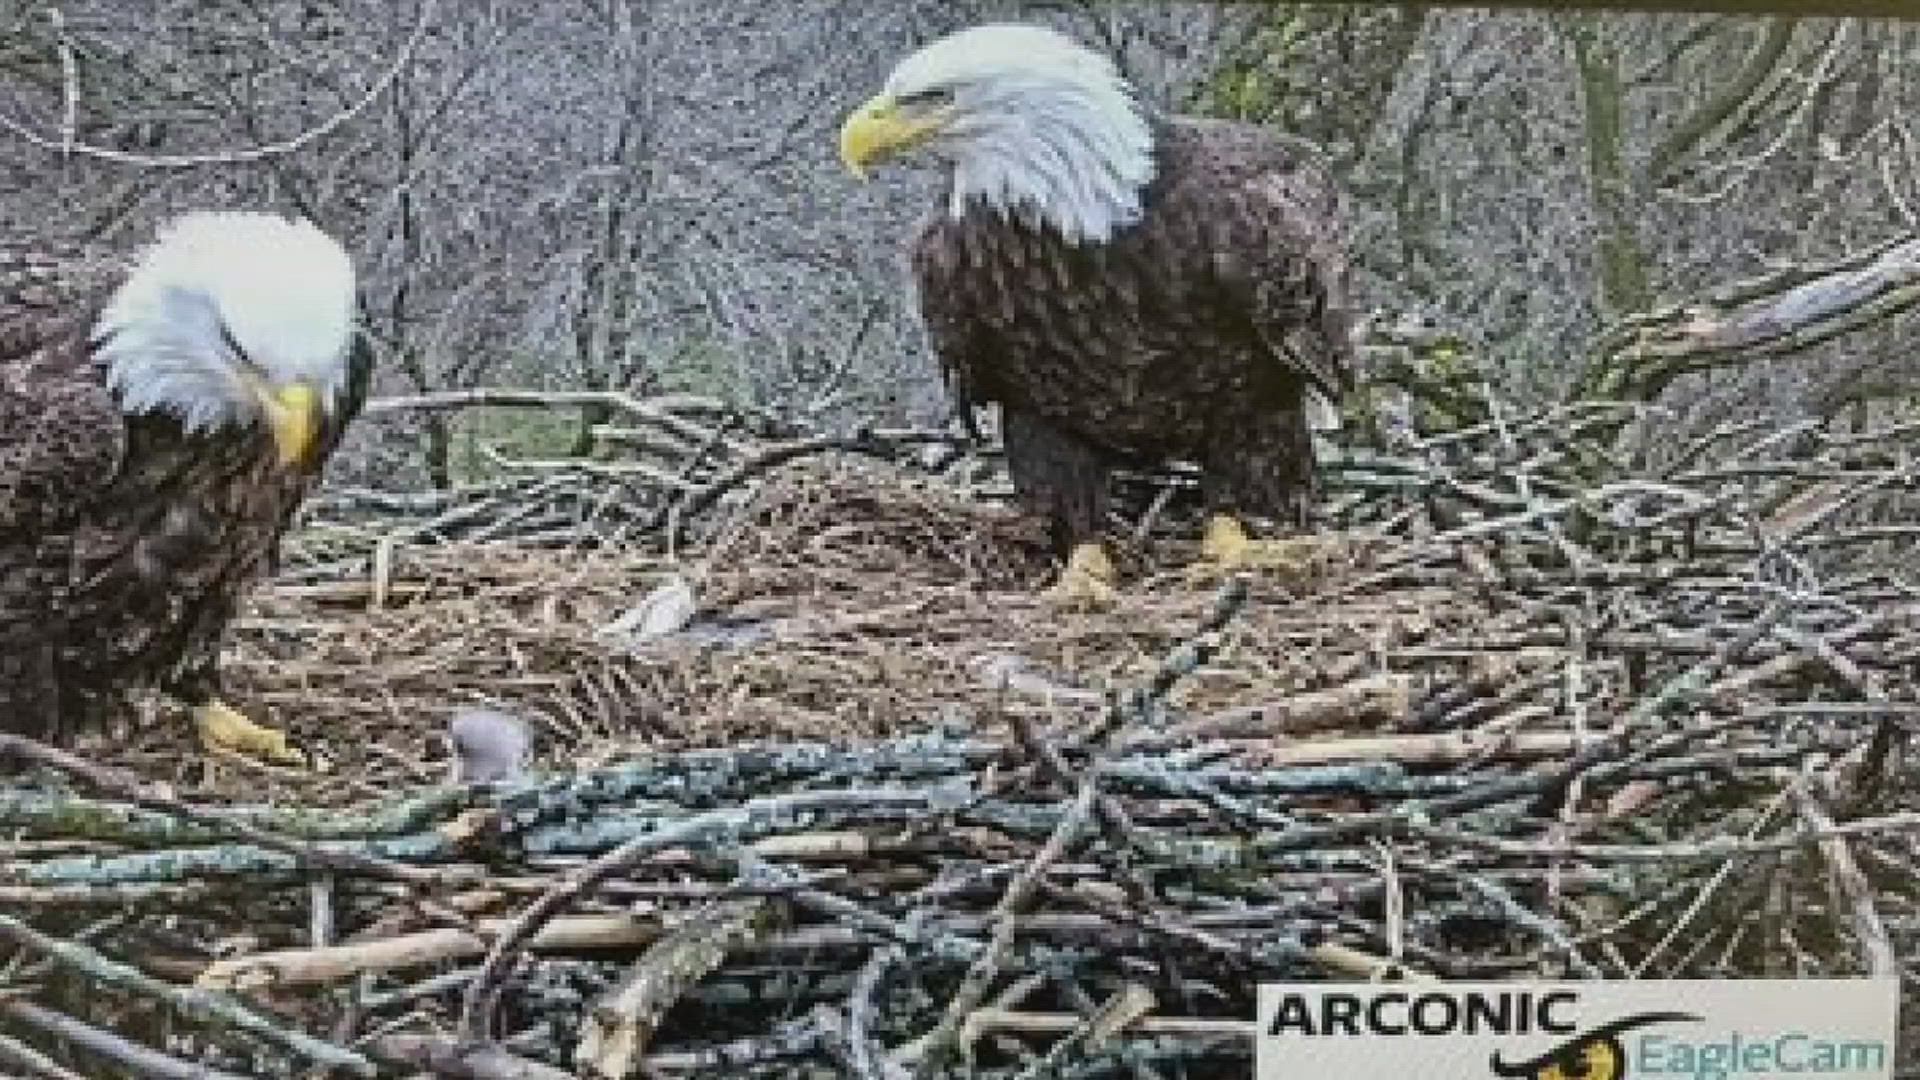 Officials said they're predicting another bird will hatch in the next few days, as well.